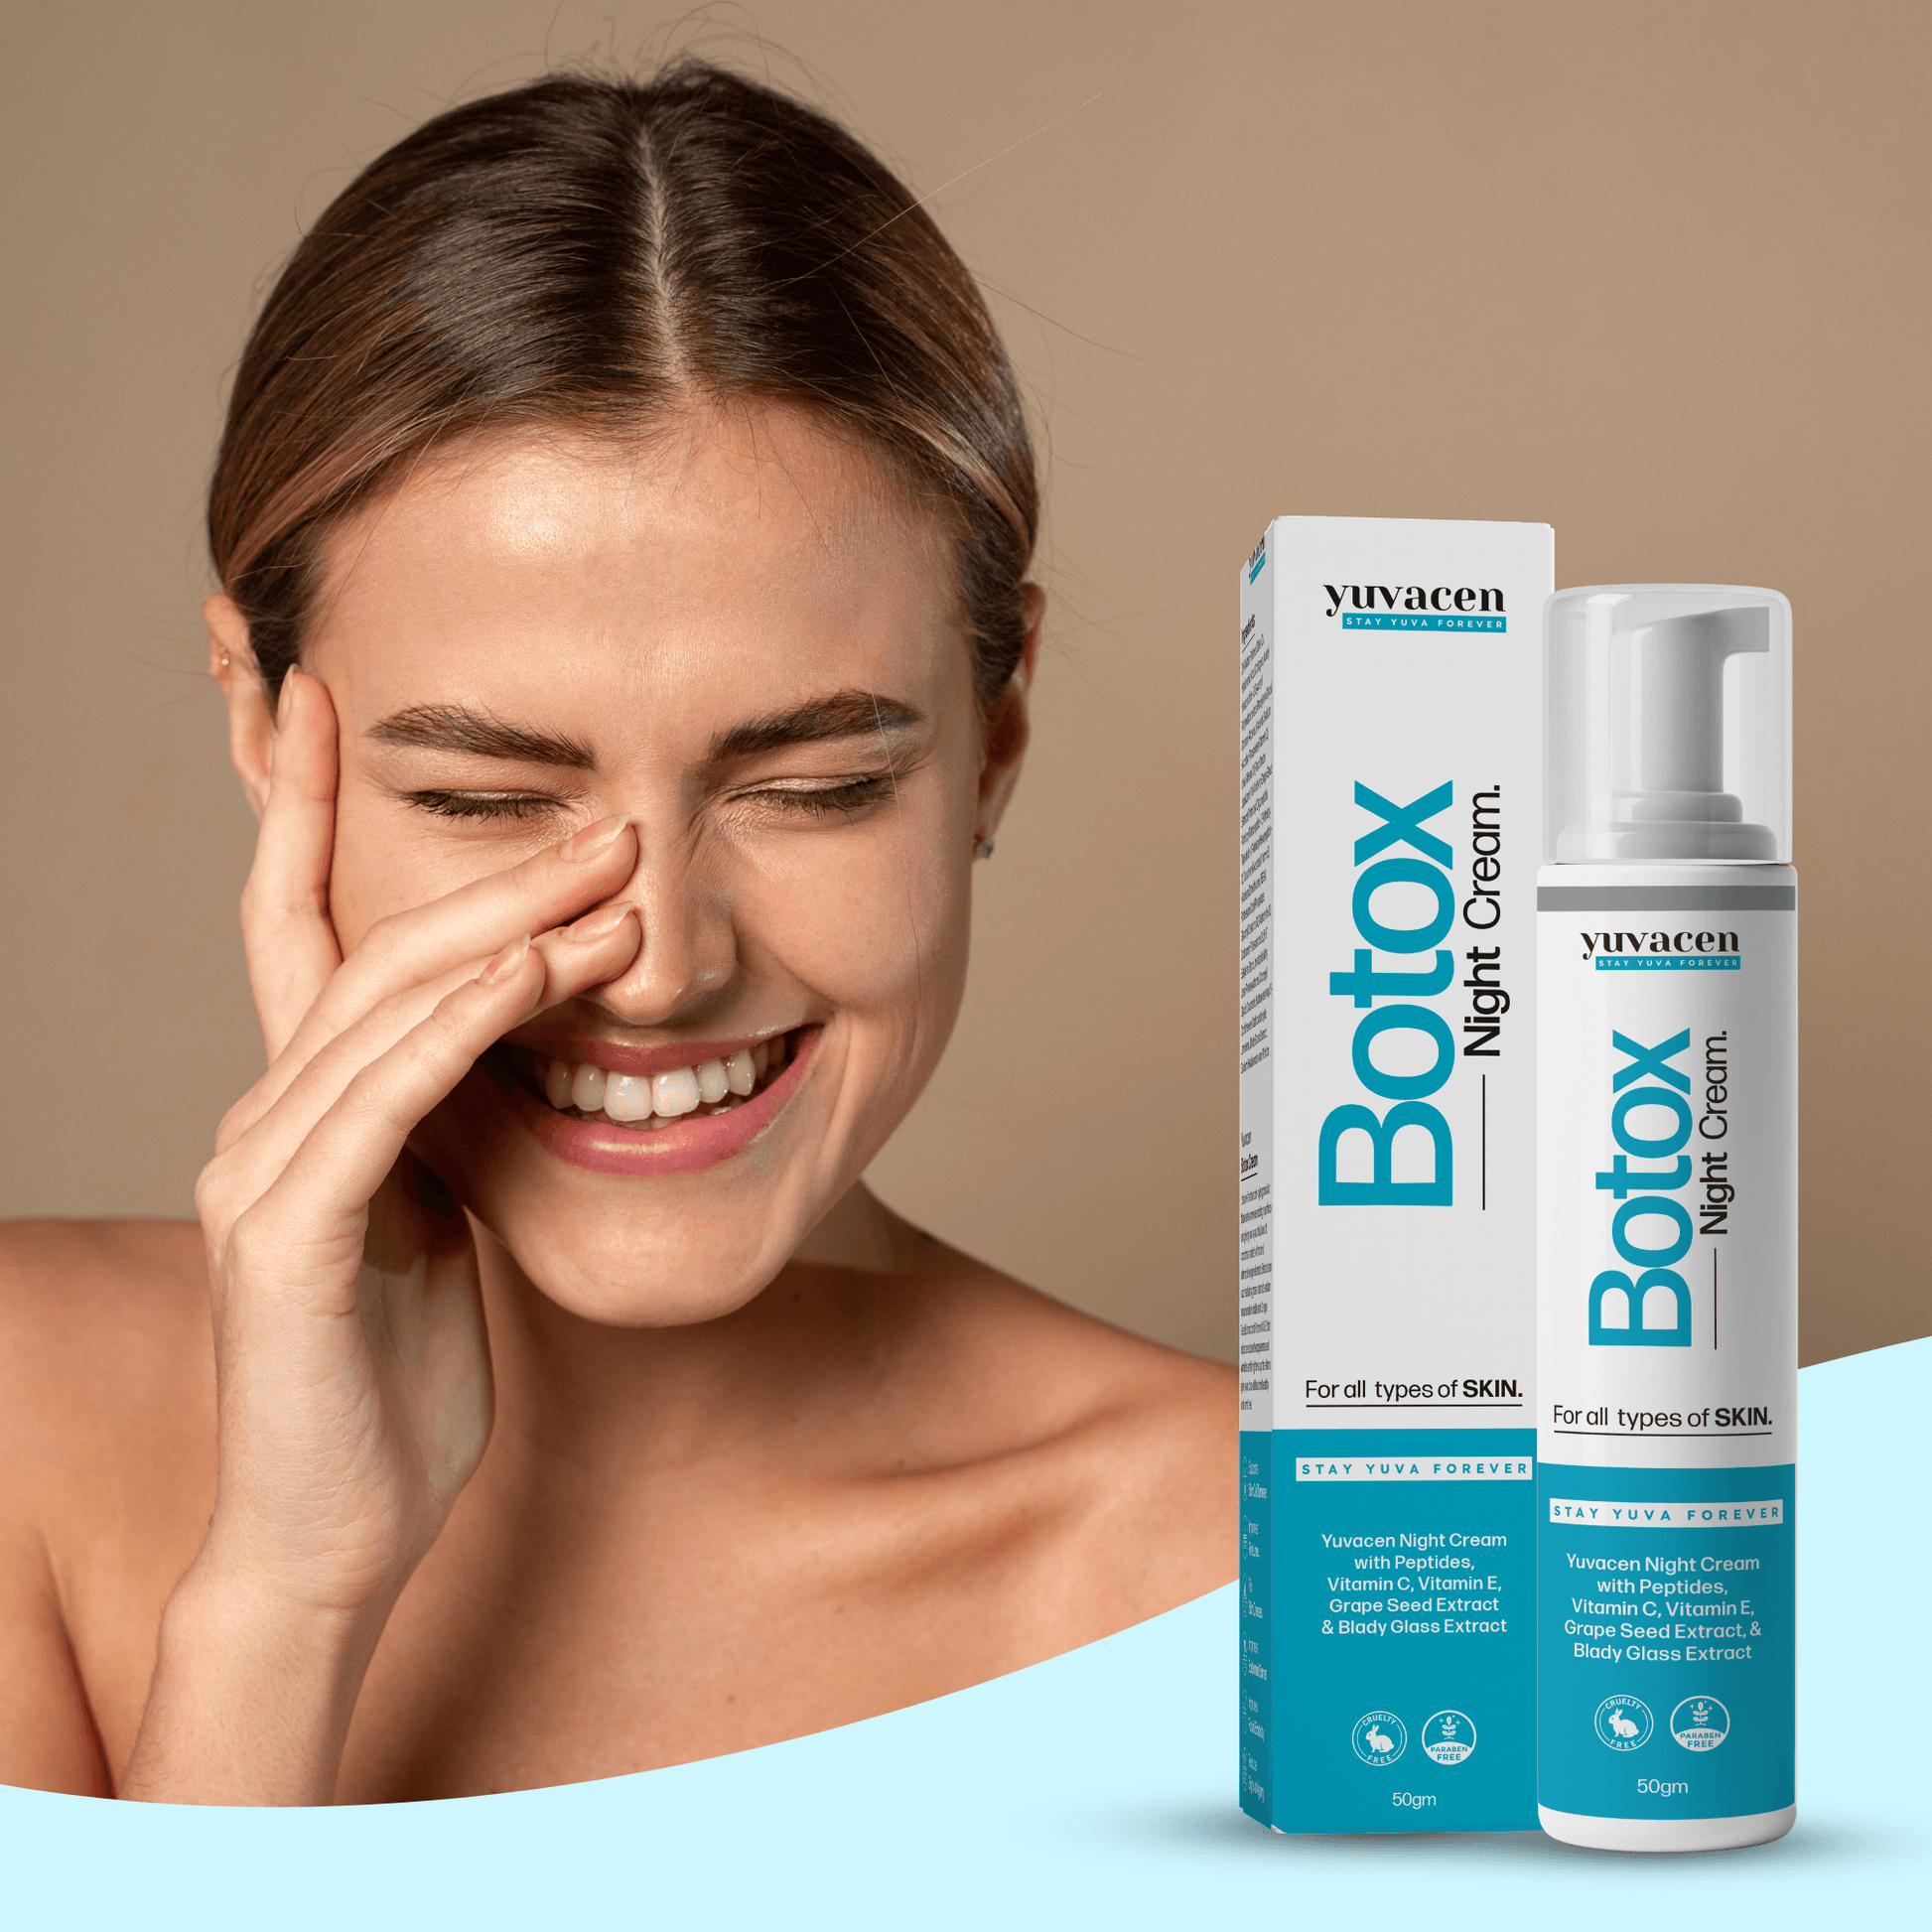 Yuvacen Botox Night Cream | For Anti-Aging Skin | best cream for reducing wrinkles | cream to Improves Fine Lines | product to enhance Collagen | reduces sign of aging